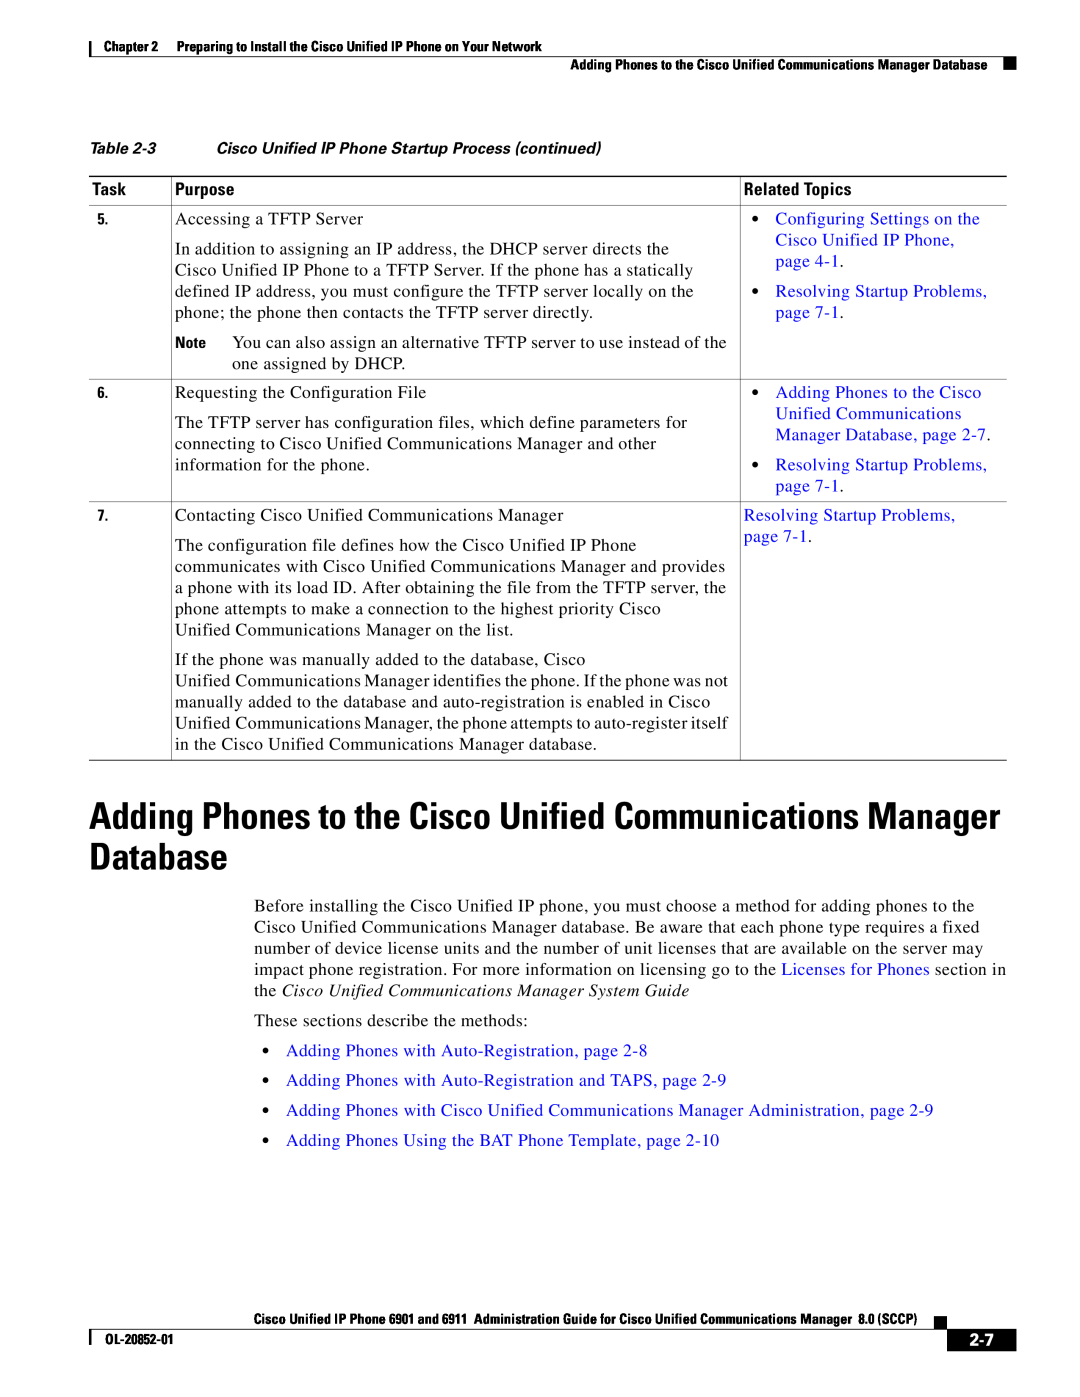 Cisco Systems 691 manual Adding Phones to the Cisco Unified Communications Manager Database, Purpose, Related Topics, page 